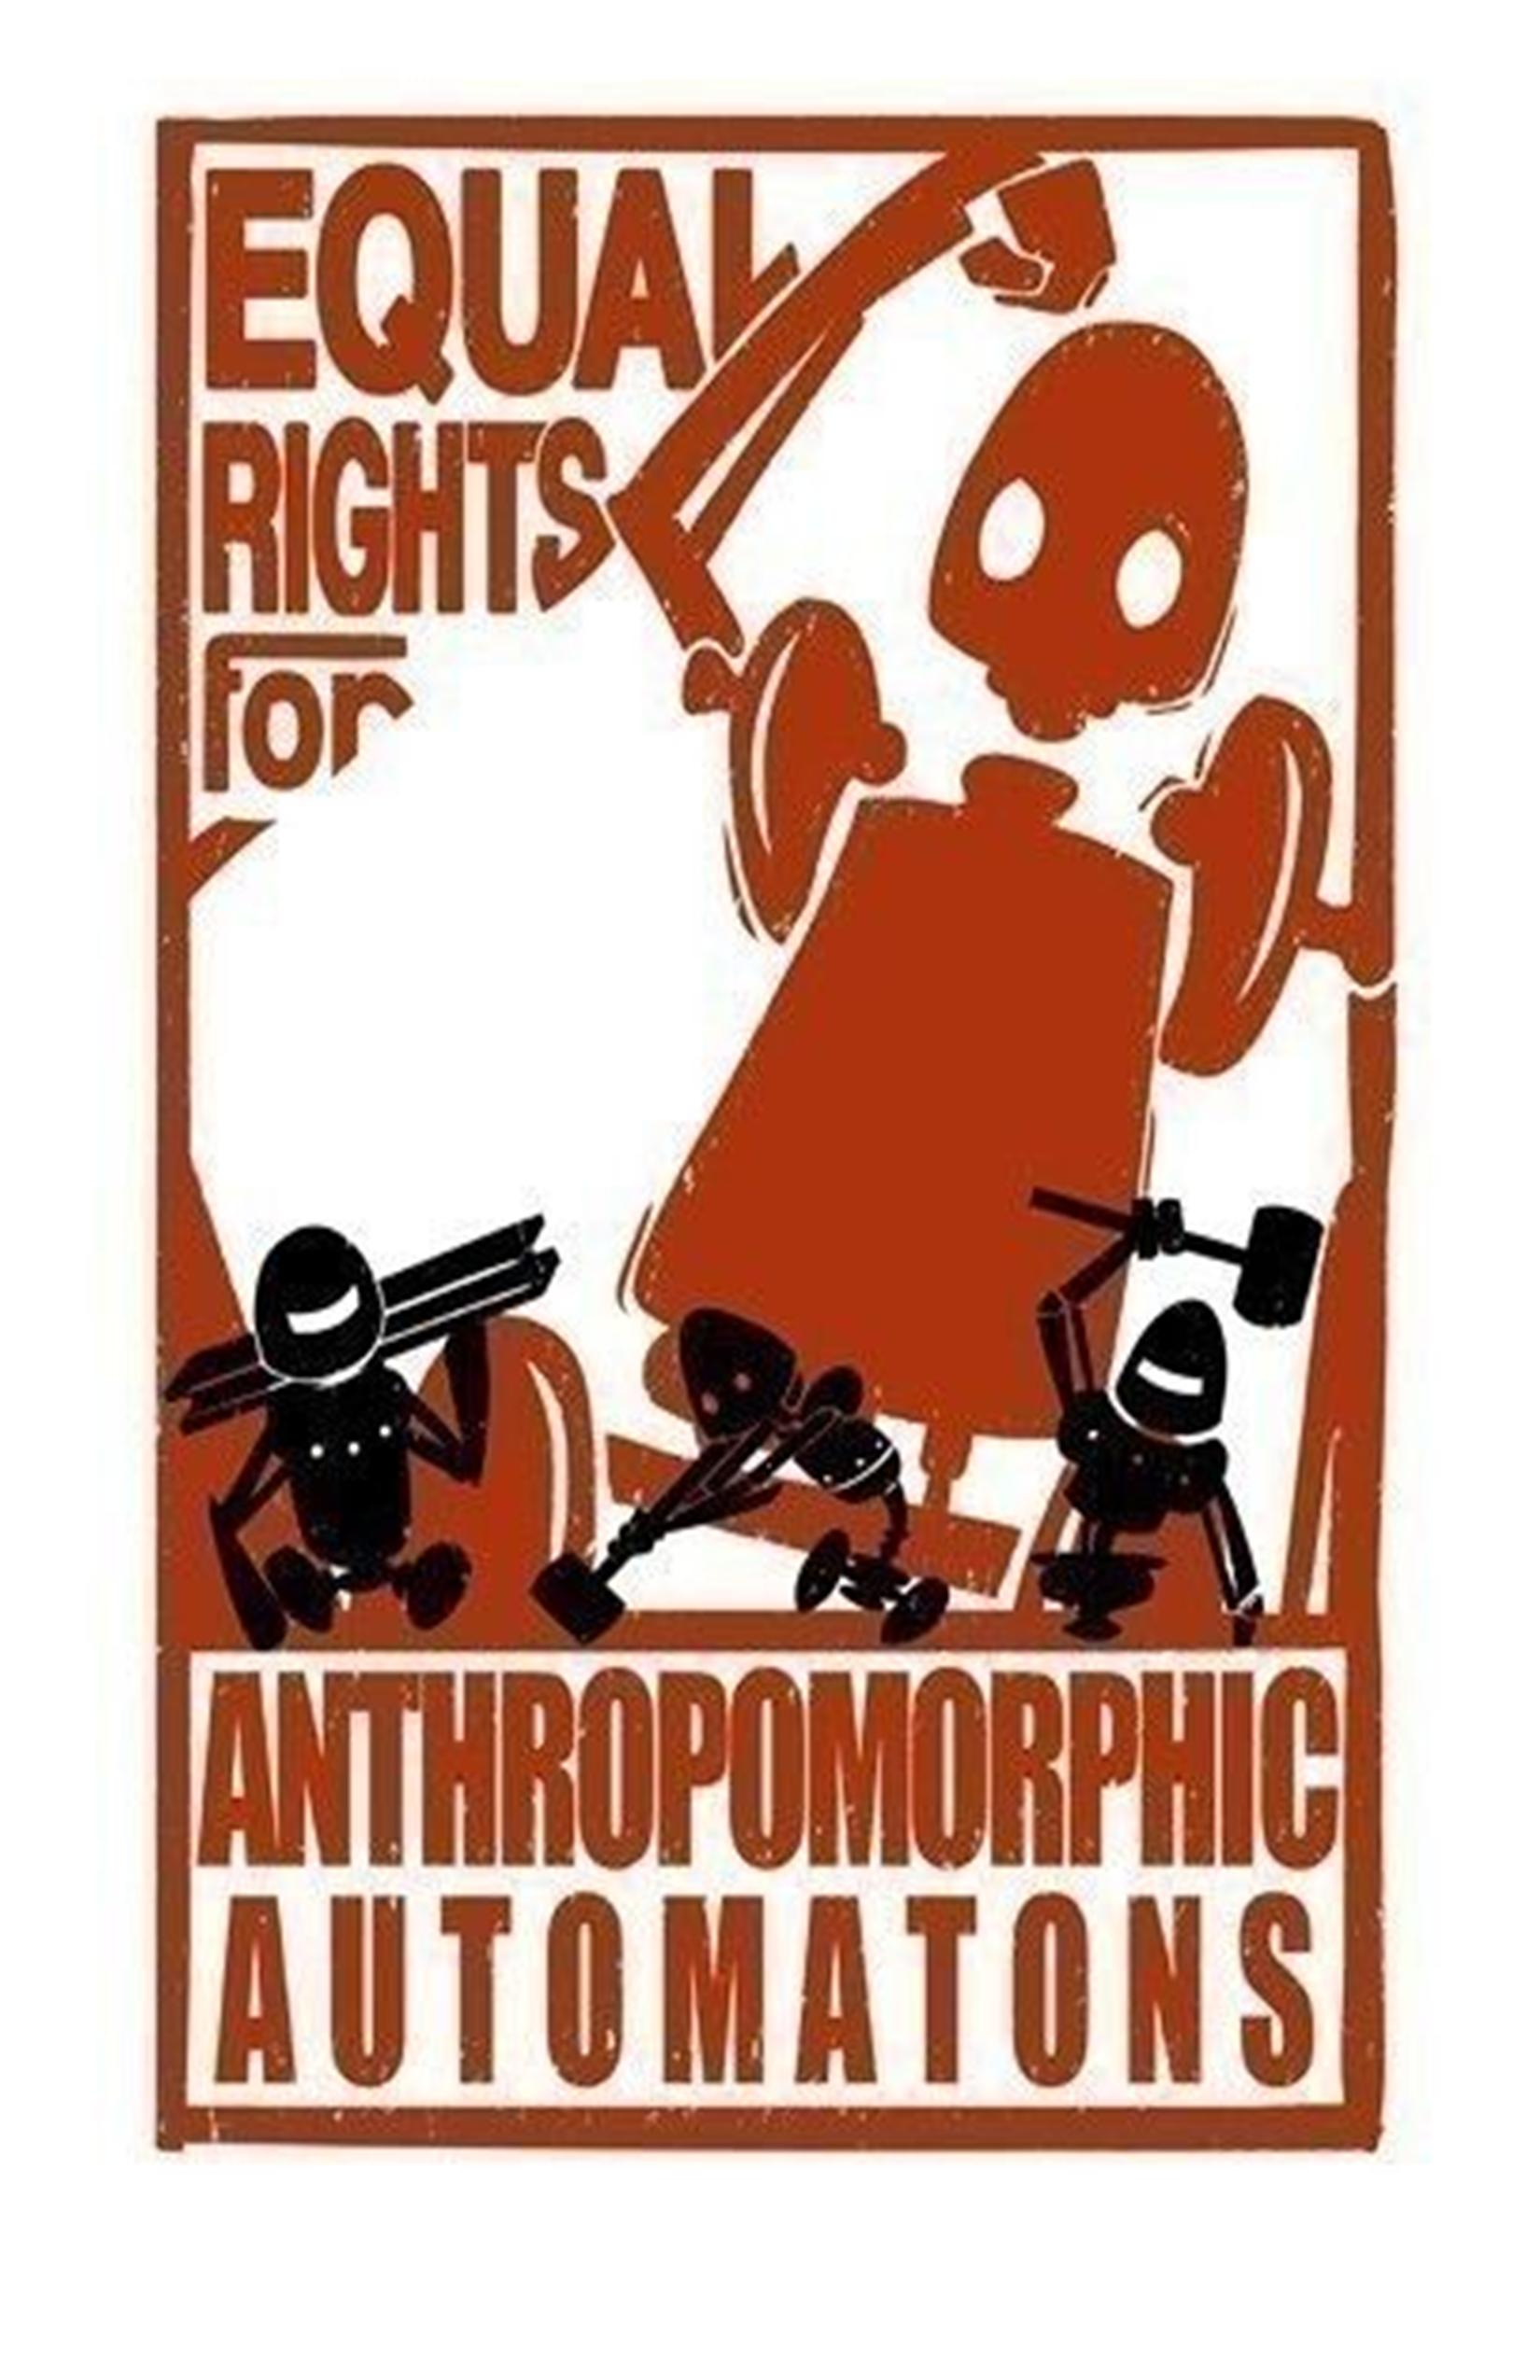 EQUAL RIGHTS FOR ROBOTS